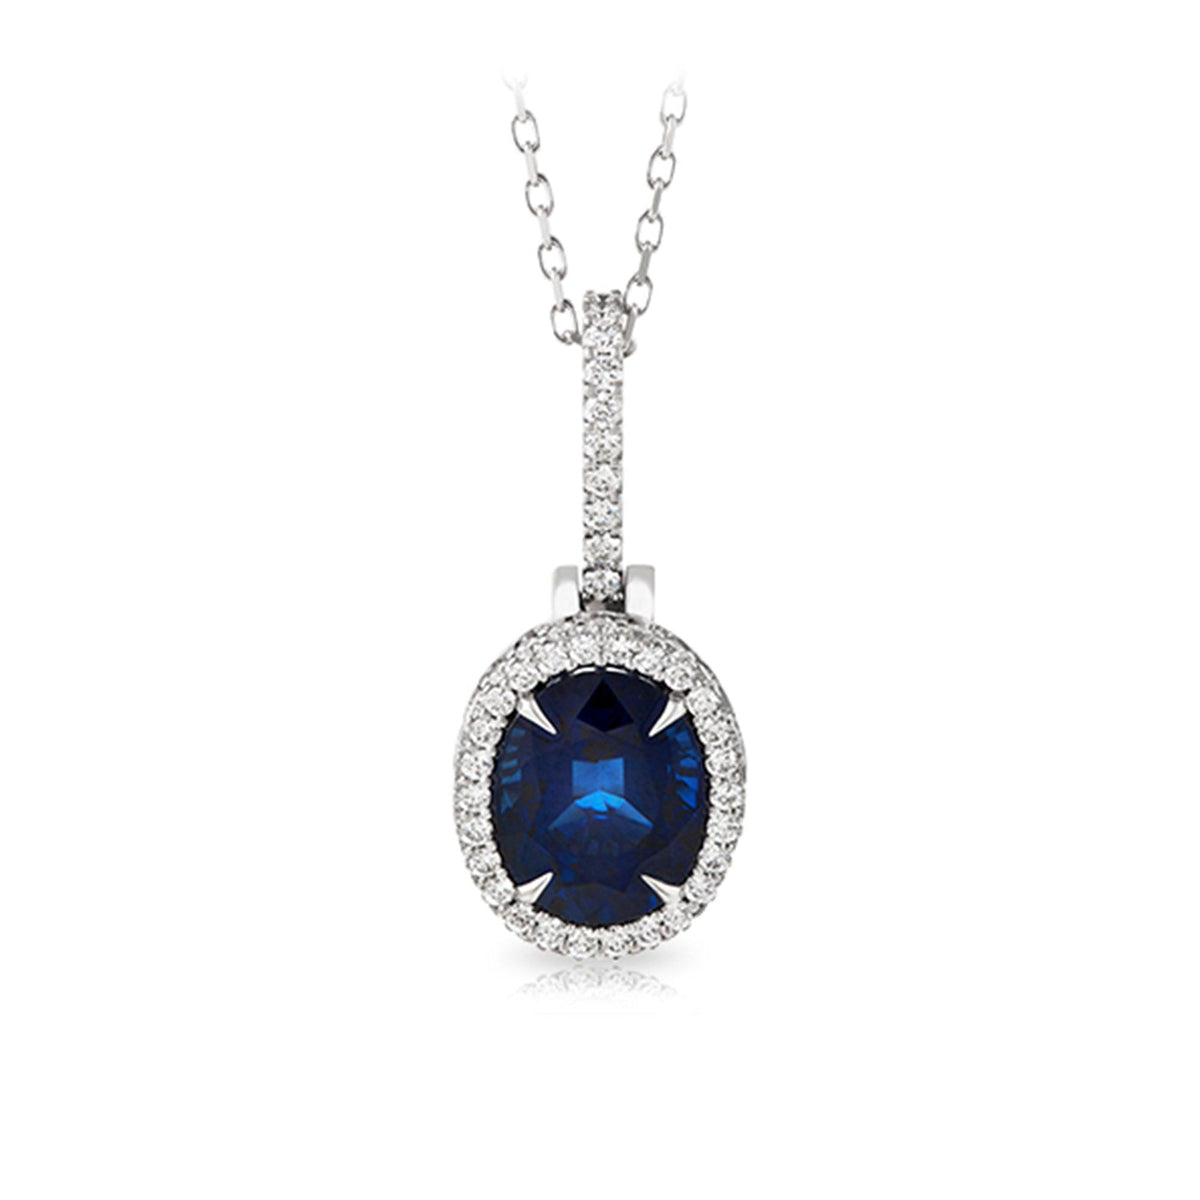 1.00ct Australian Sapphire and TDW 0.60ct Diamond Necklace in 18ct White Gold - Wallace Bishop